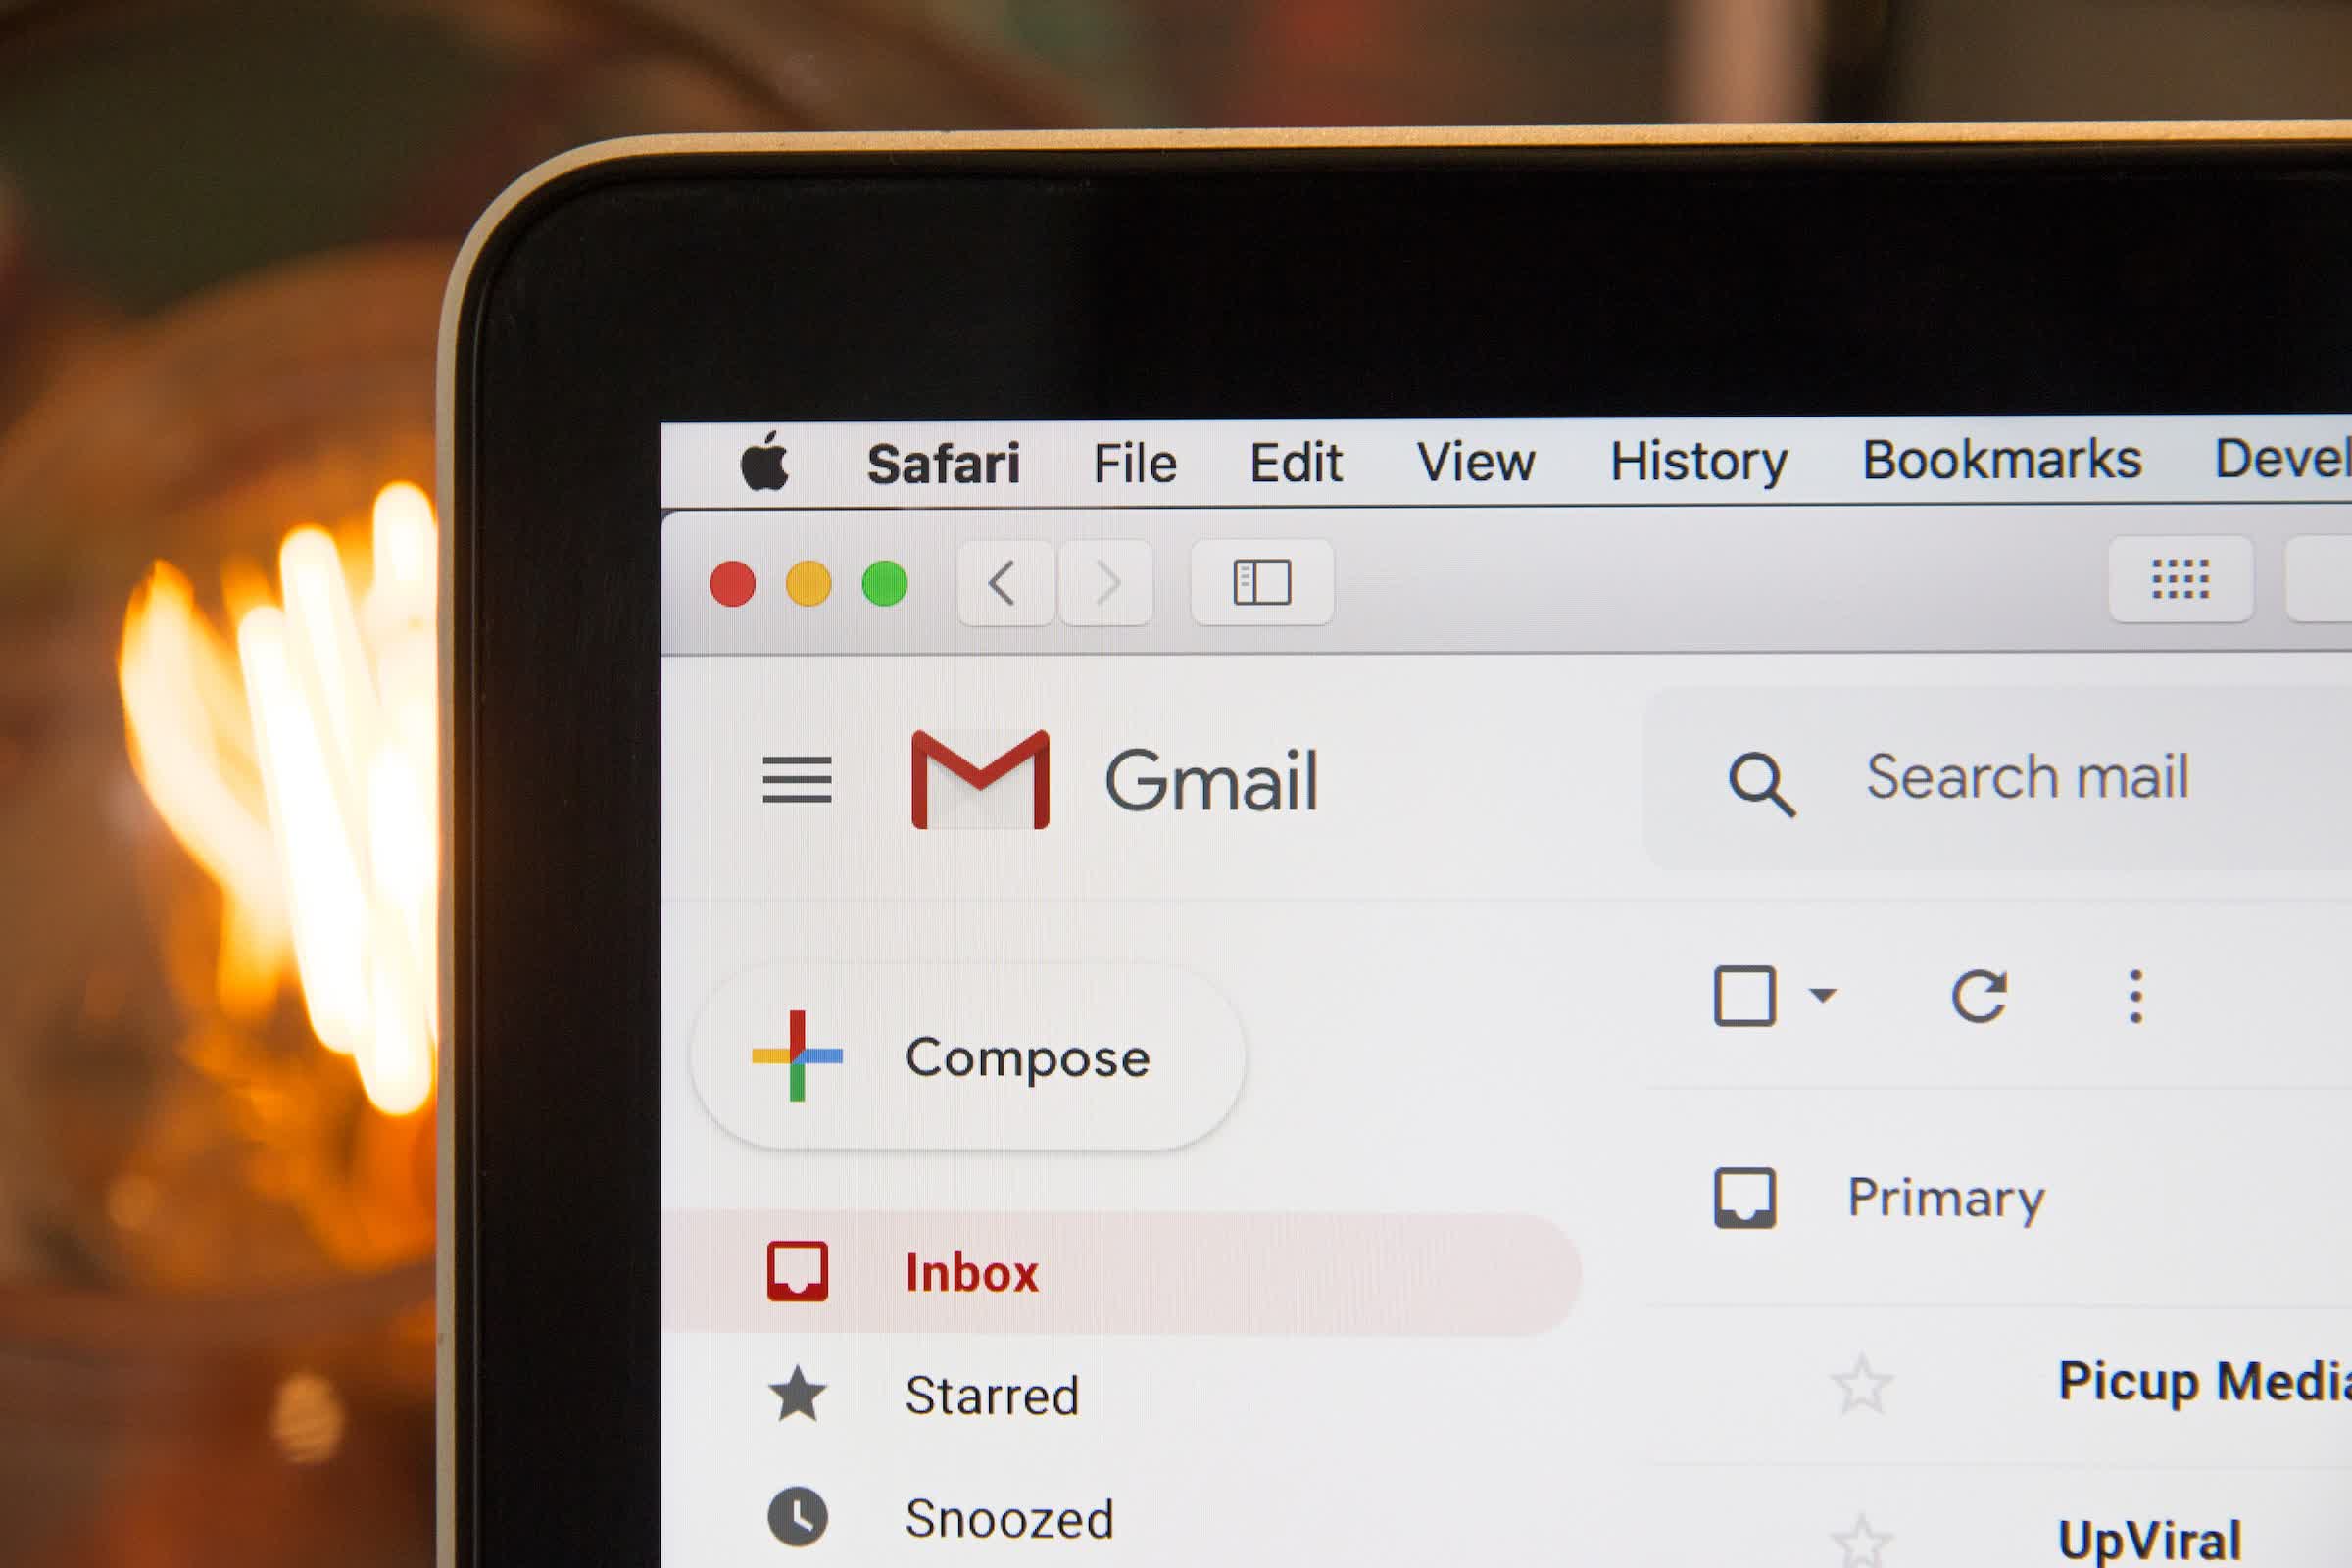 Google is using machine learning models to speed up Gmail search